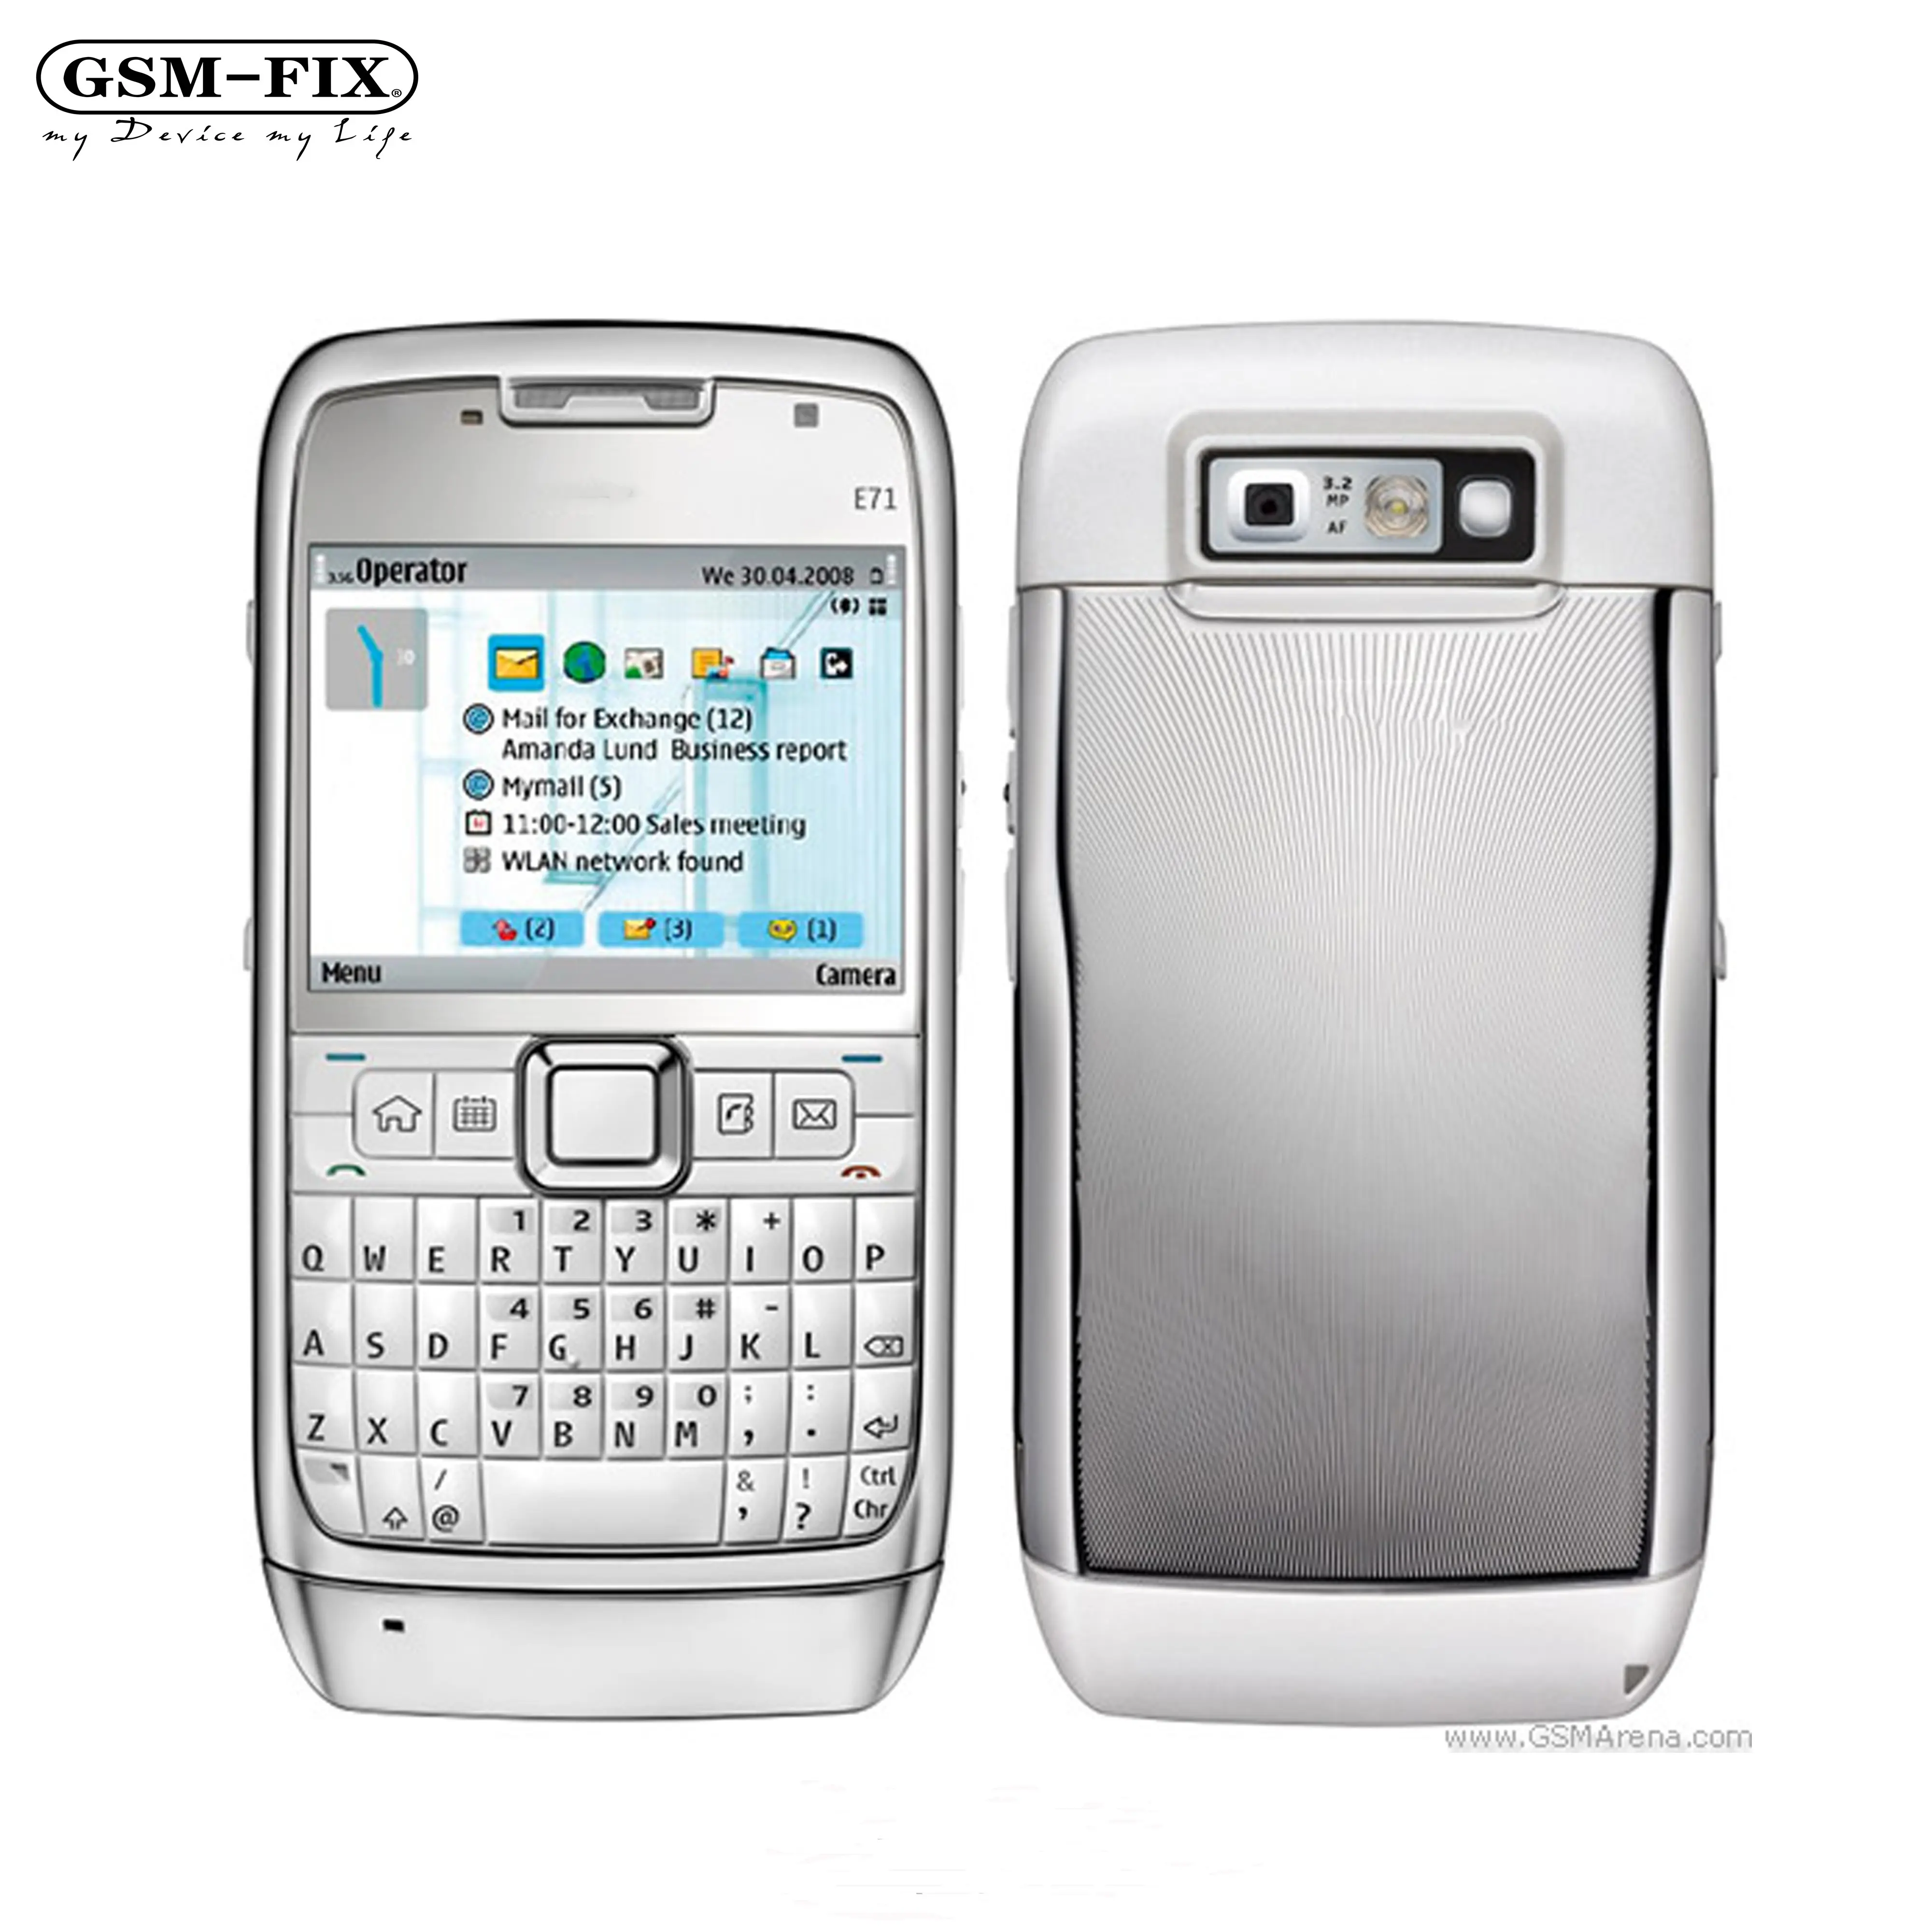 GSM-FIX Original E71 For Nokia Mobile Phone 3.2MP 3G Unlocked For Nokia E71 QWERTY Keyboard Cell Phone Feature Phone